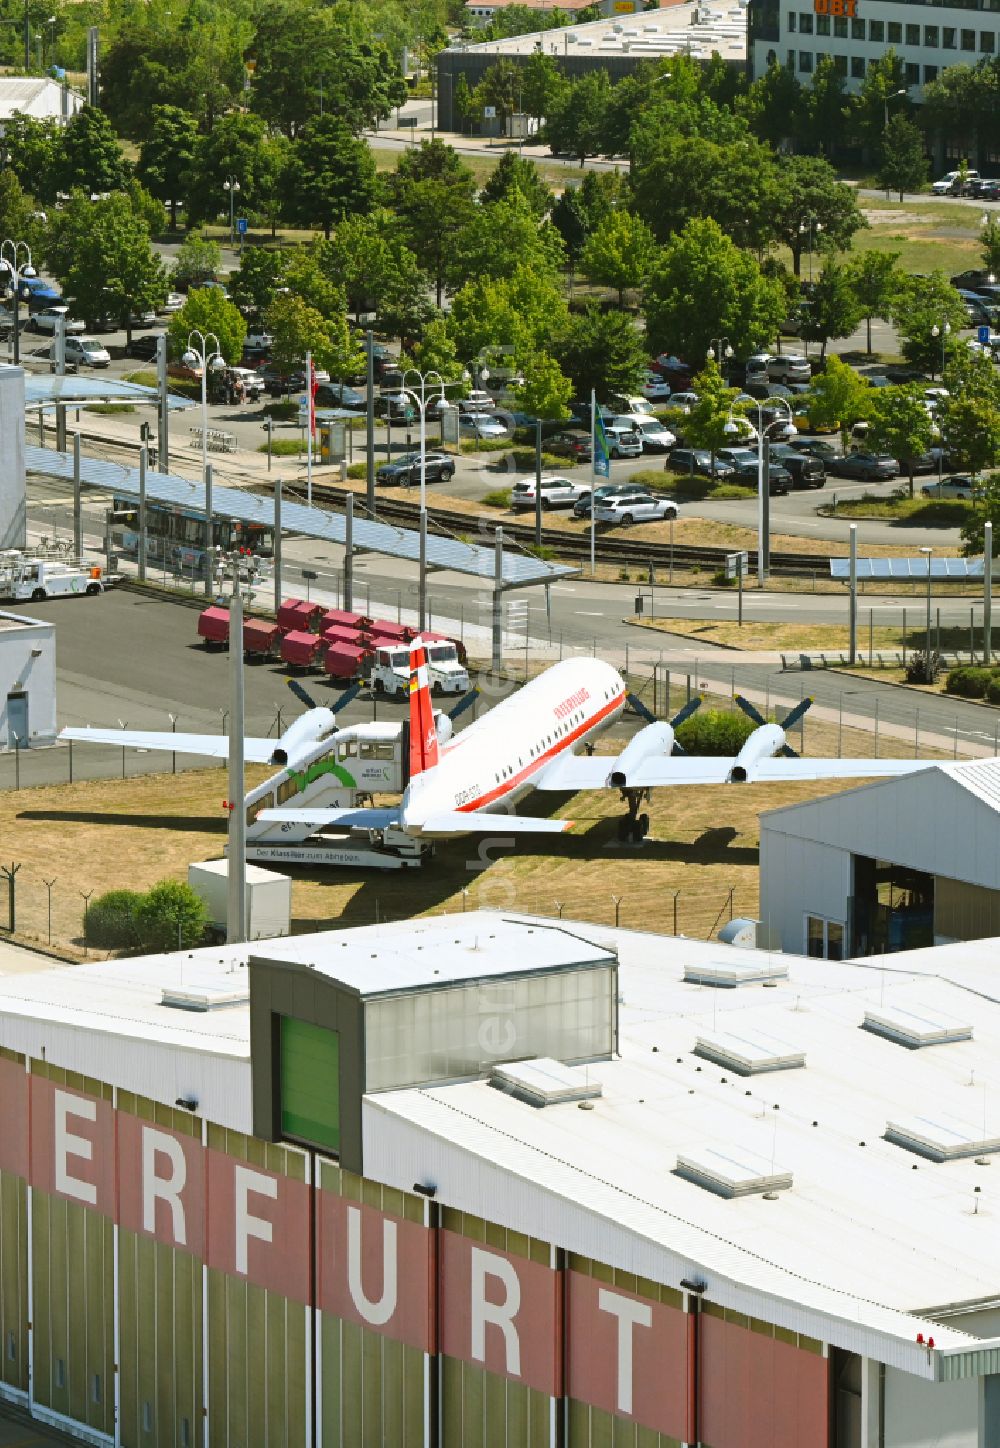 Aerial photograph Erfurt - Passenger airplane of Interflug als Ausstellungsstueck in parking position - parking area at the airport in the district Bindersleben in Erfurt in the state Thuringia, Germany